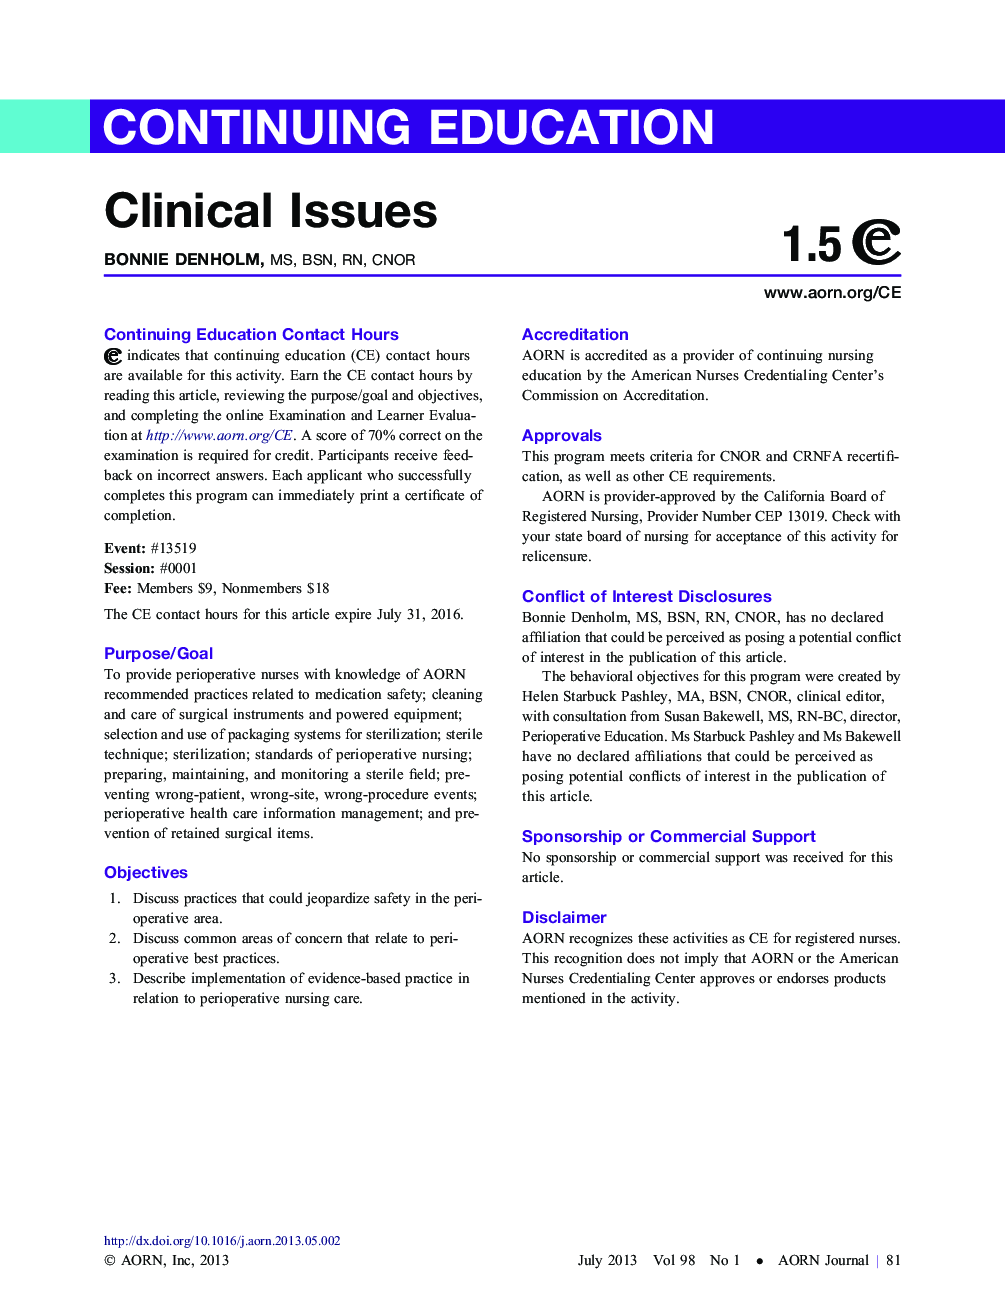 Clinical Issues-July 2013